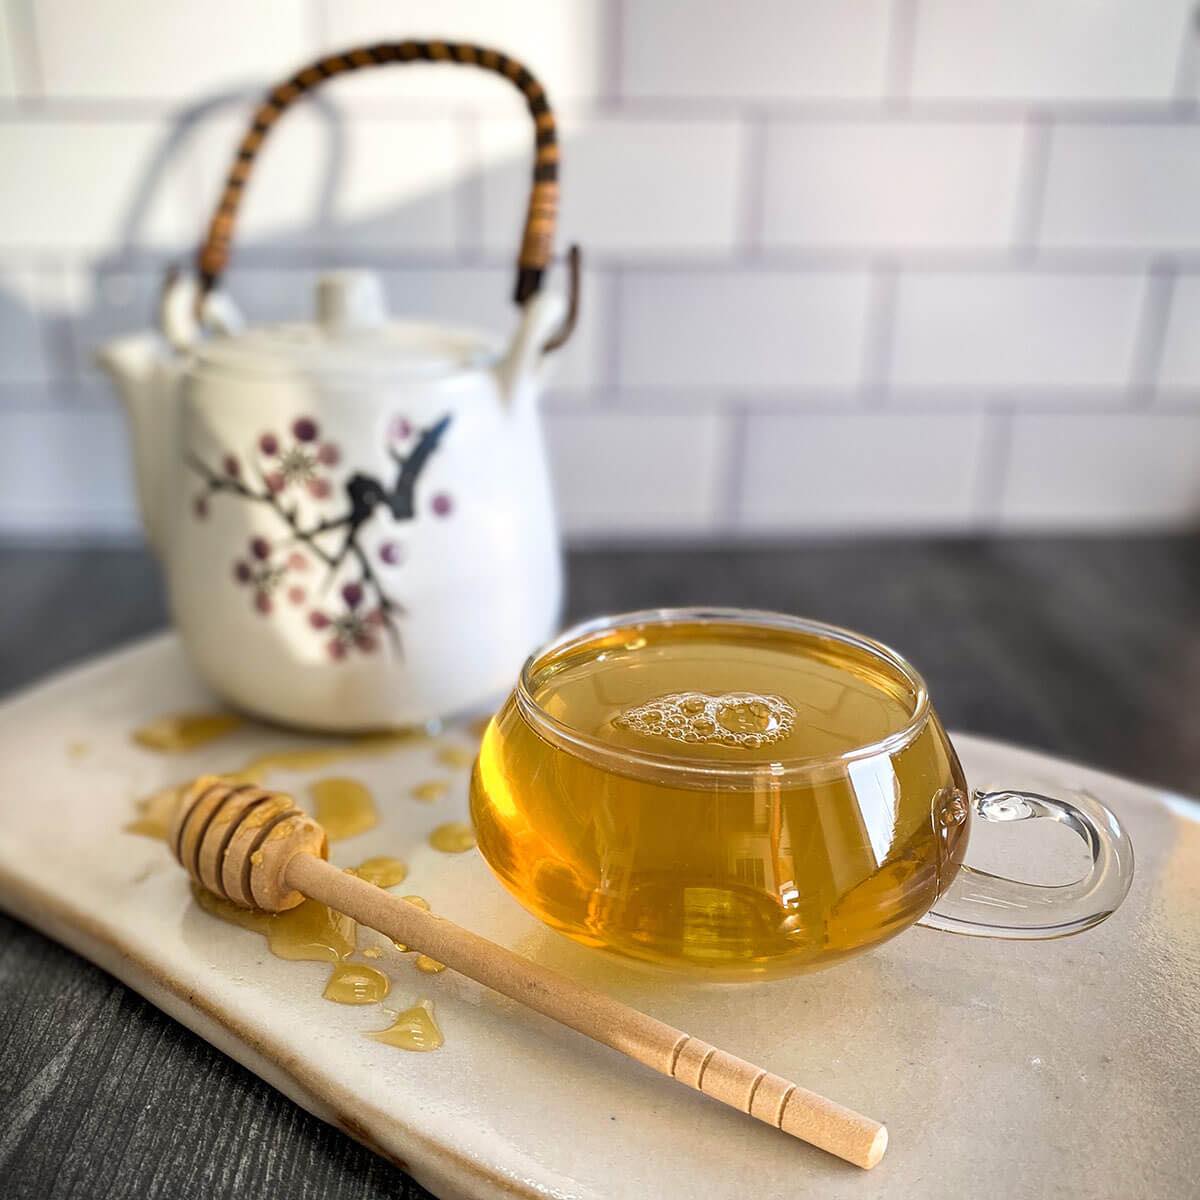 Jasmine Green tea brewed in a clear glass mug with a honey wand and a white tea pot in the background.